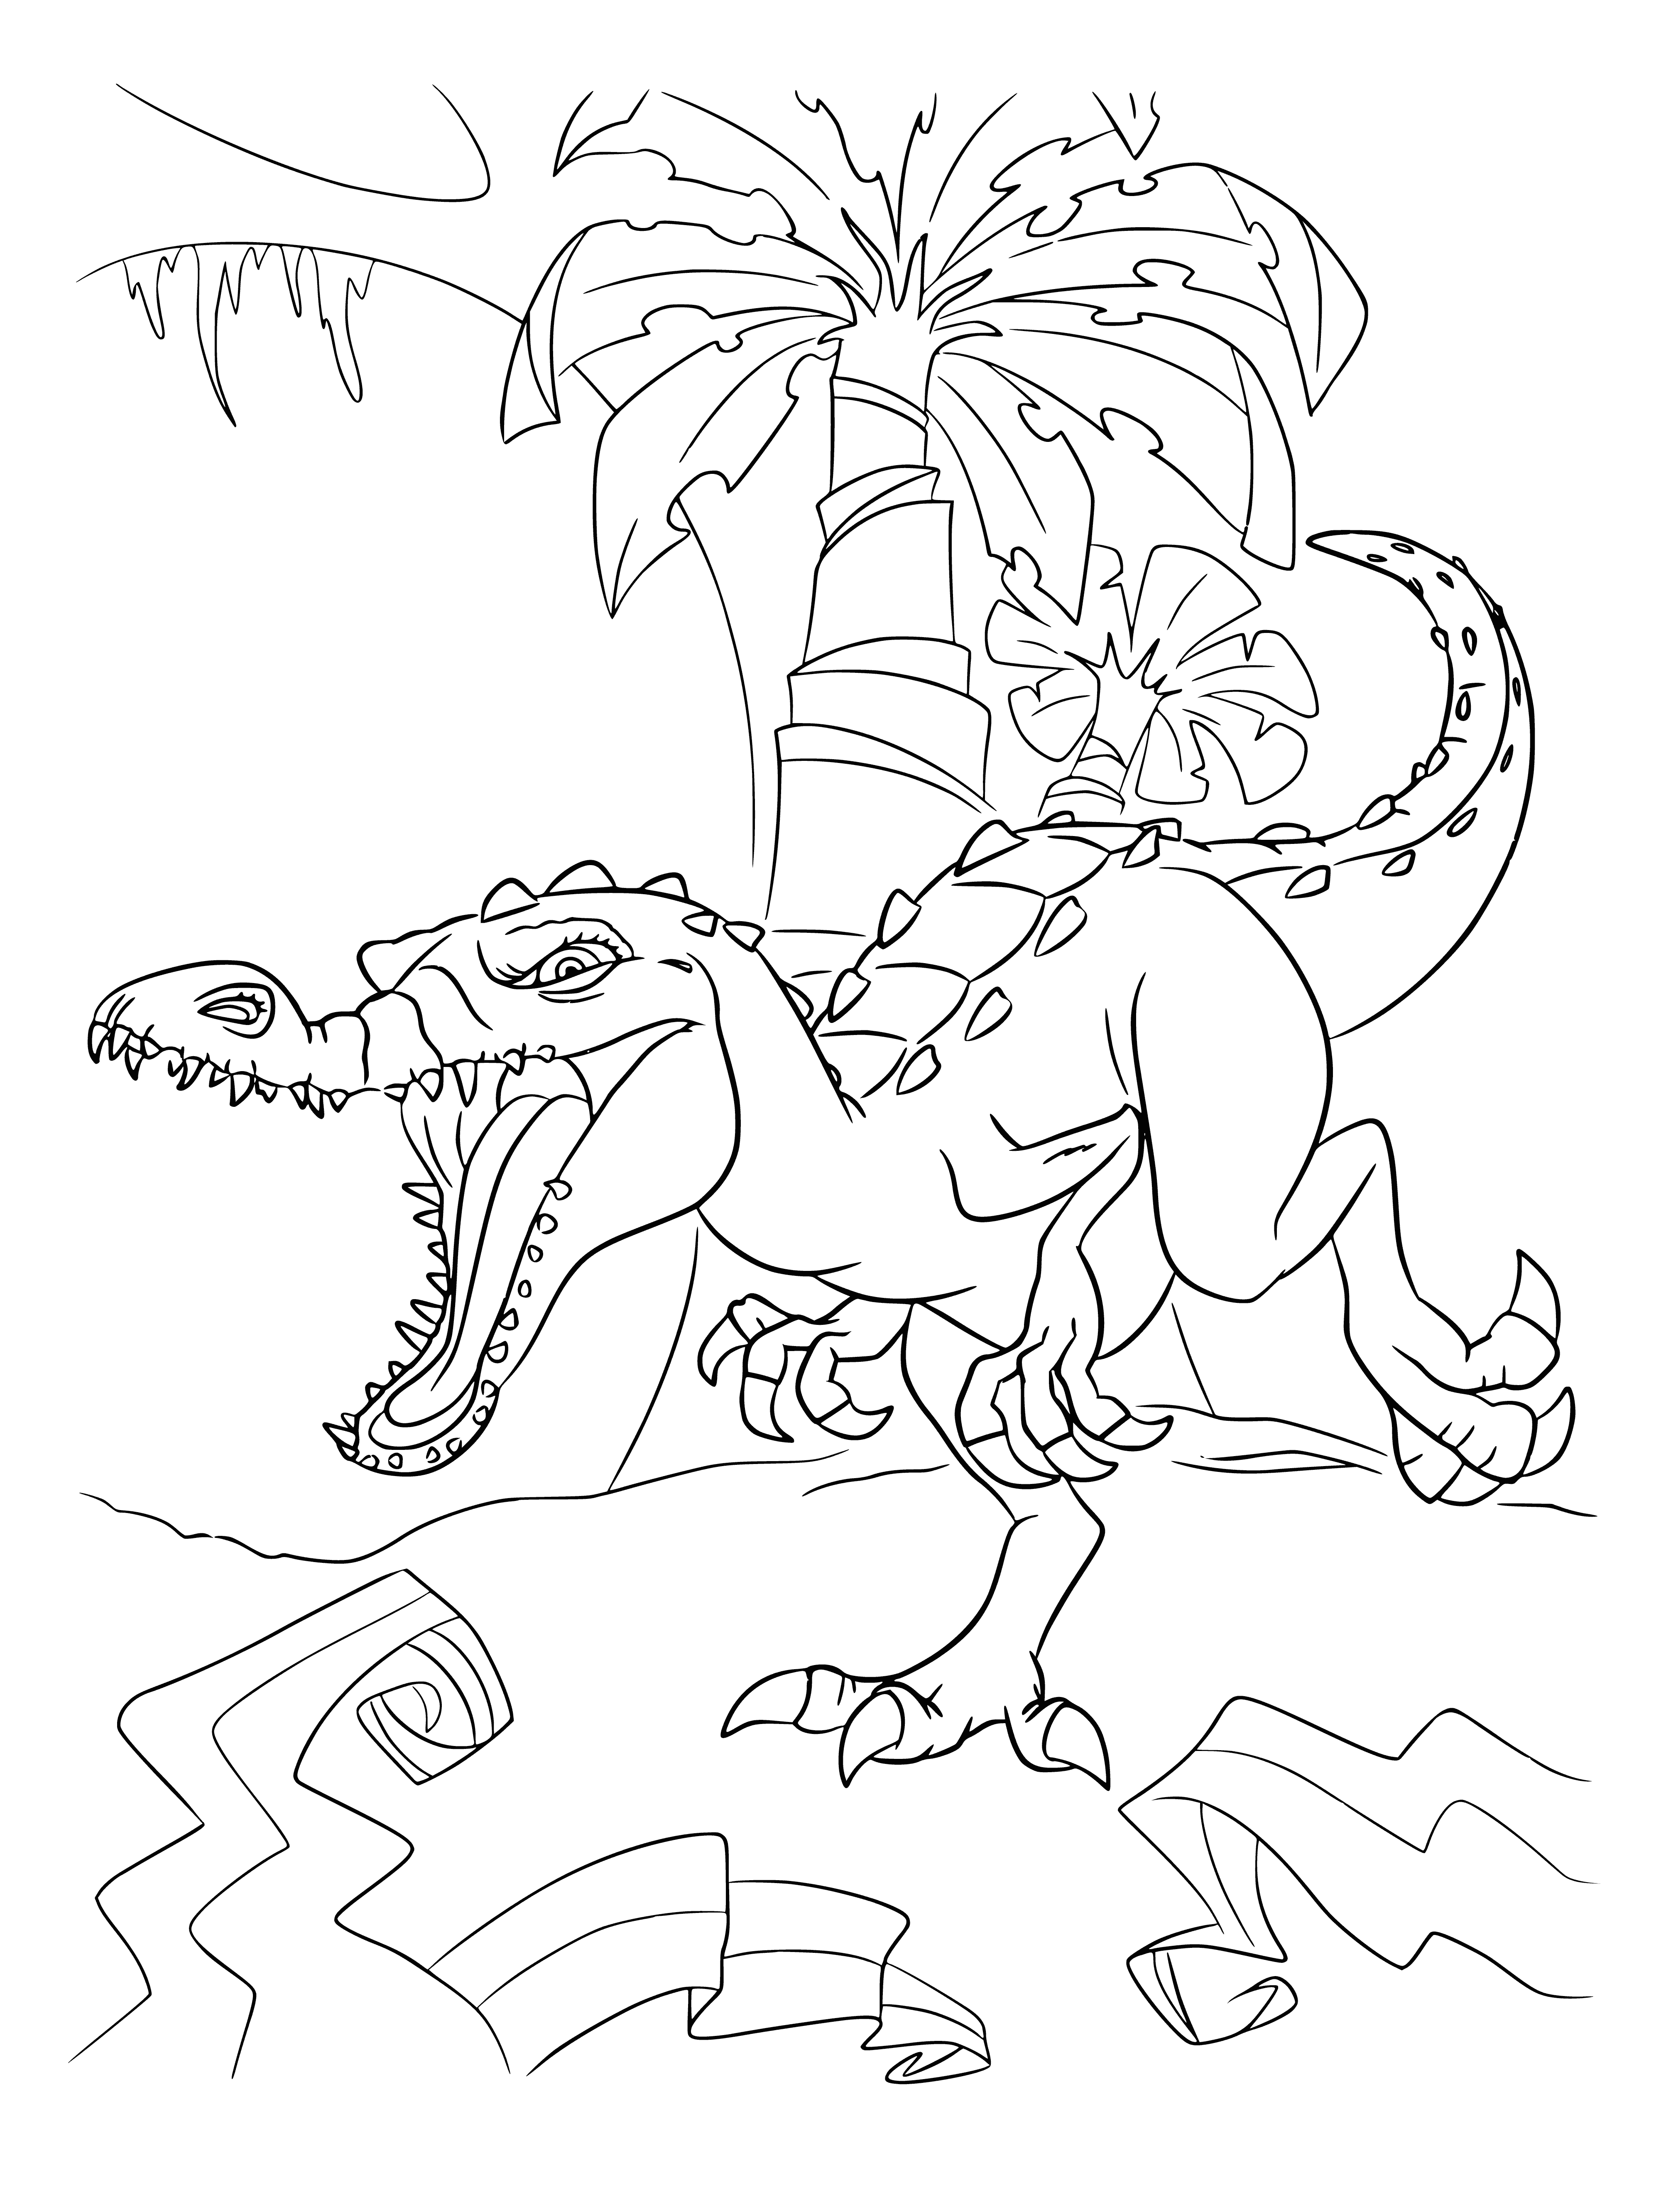 coloring page: Ice Age: Dinosaur scene with a large one eating a small one in a snowy, dark setting. #dinosaurs #iceage #coloringpages